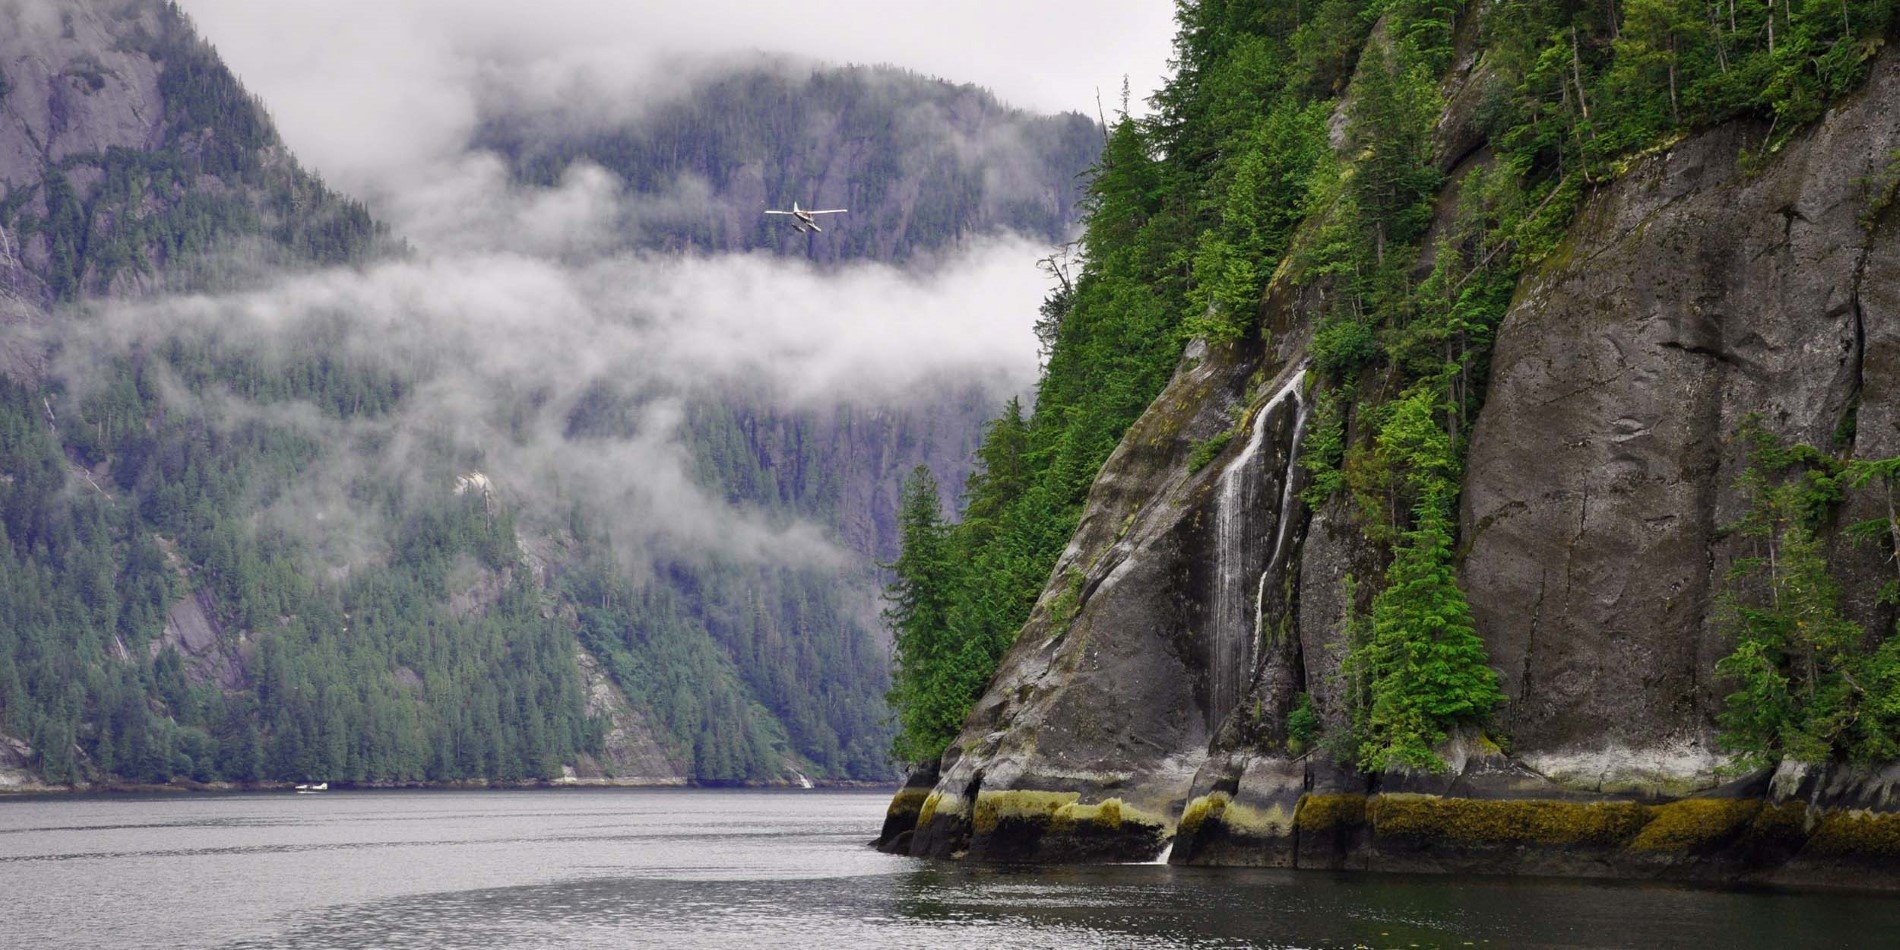 Explore the mysterious beauty of the fjord.